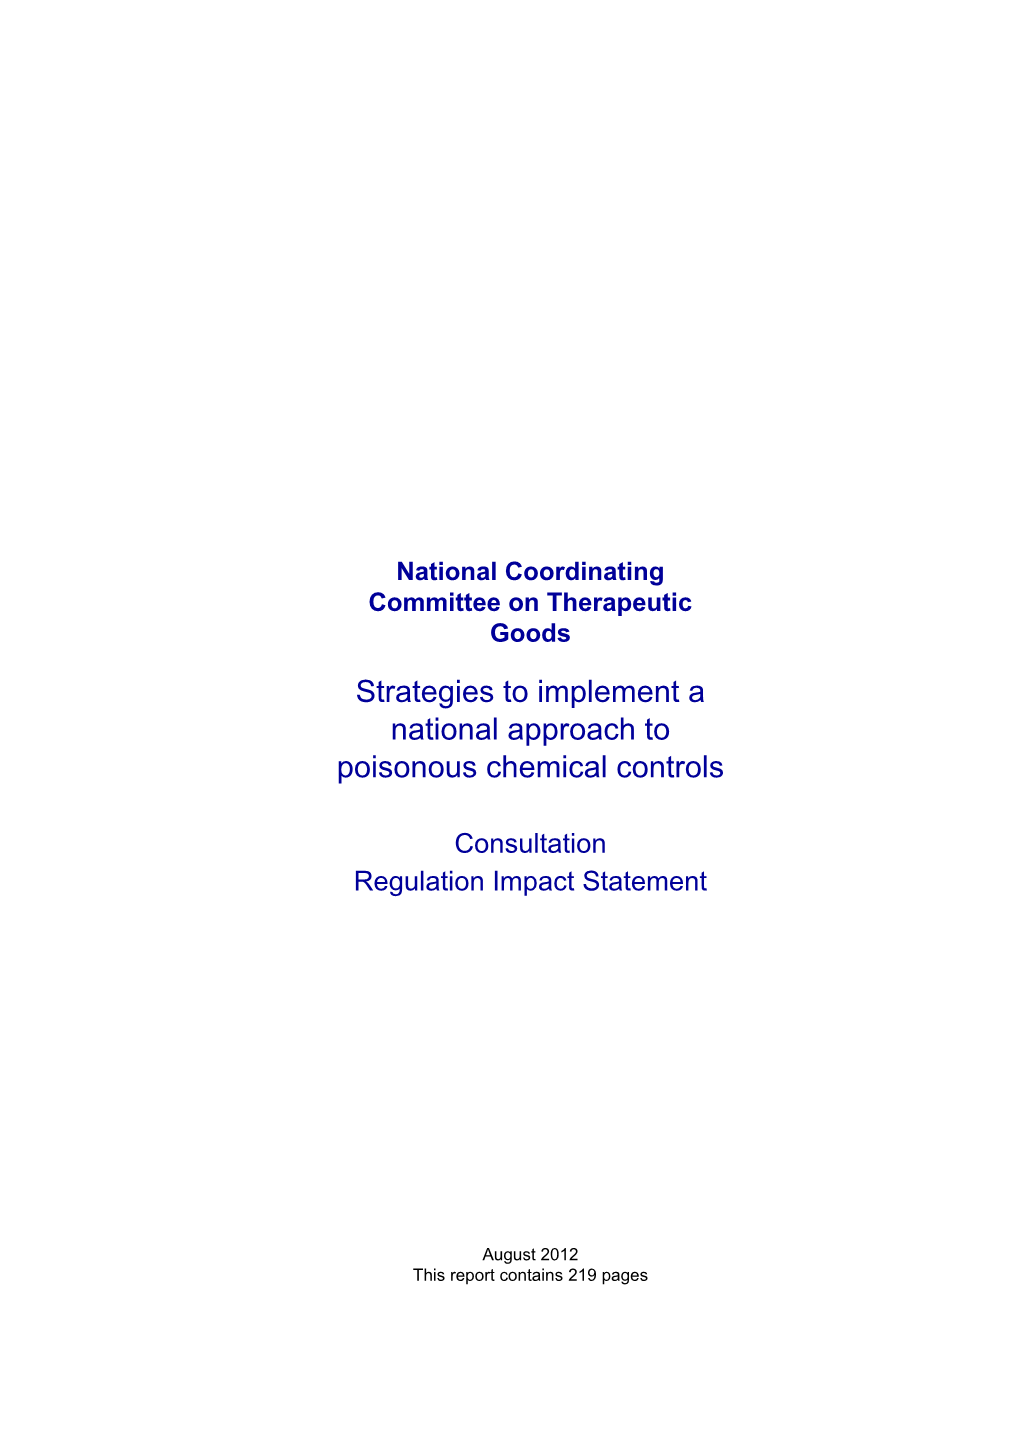 Strategies to Implement a National Approach to Poisonous Chemical Controls Consultation